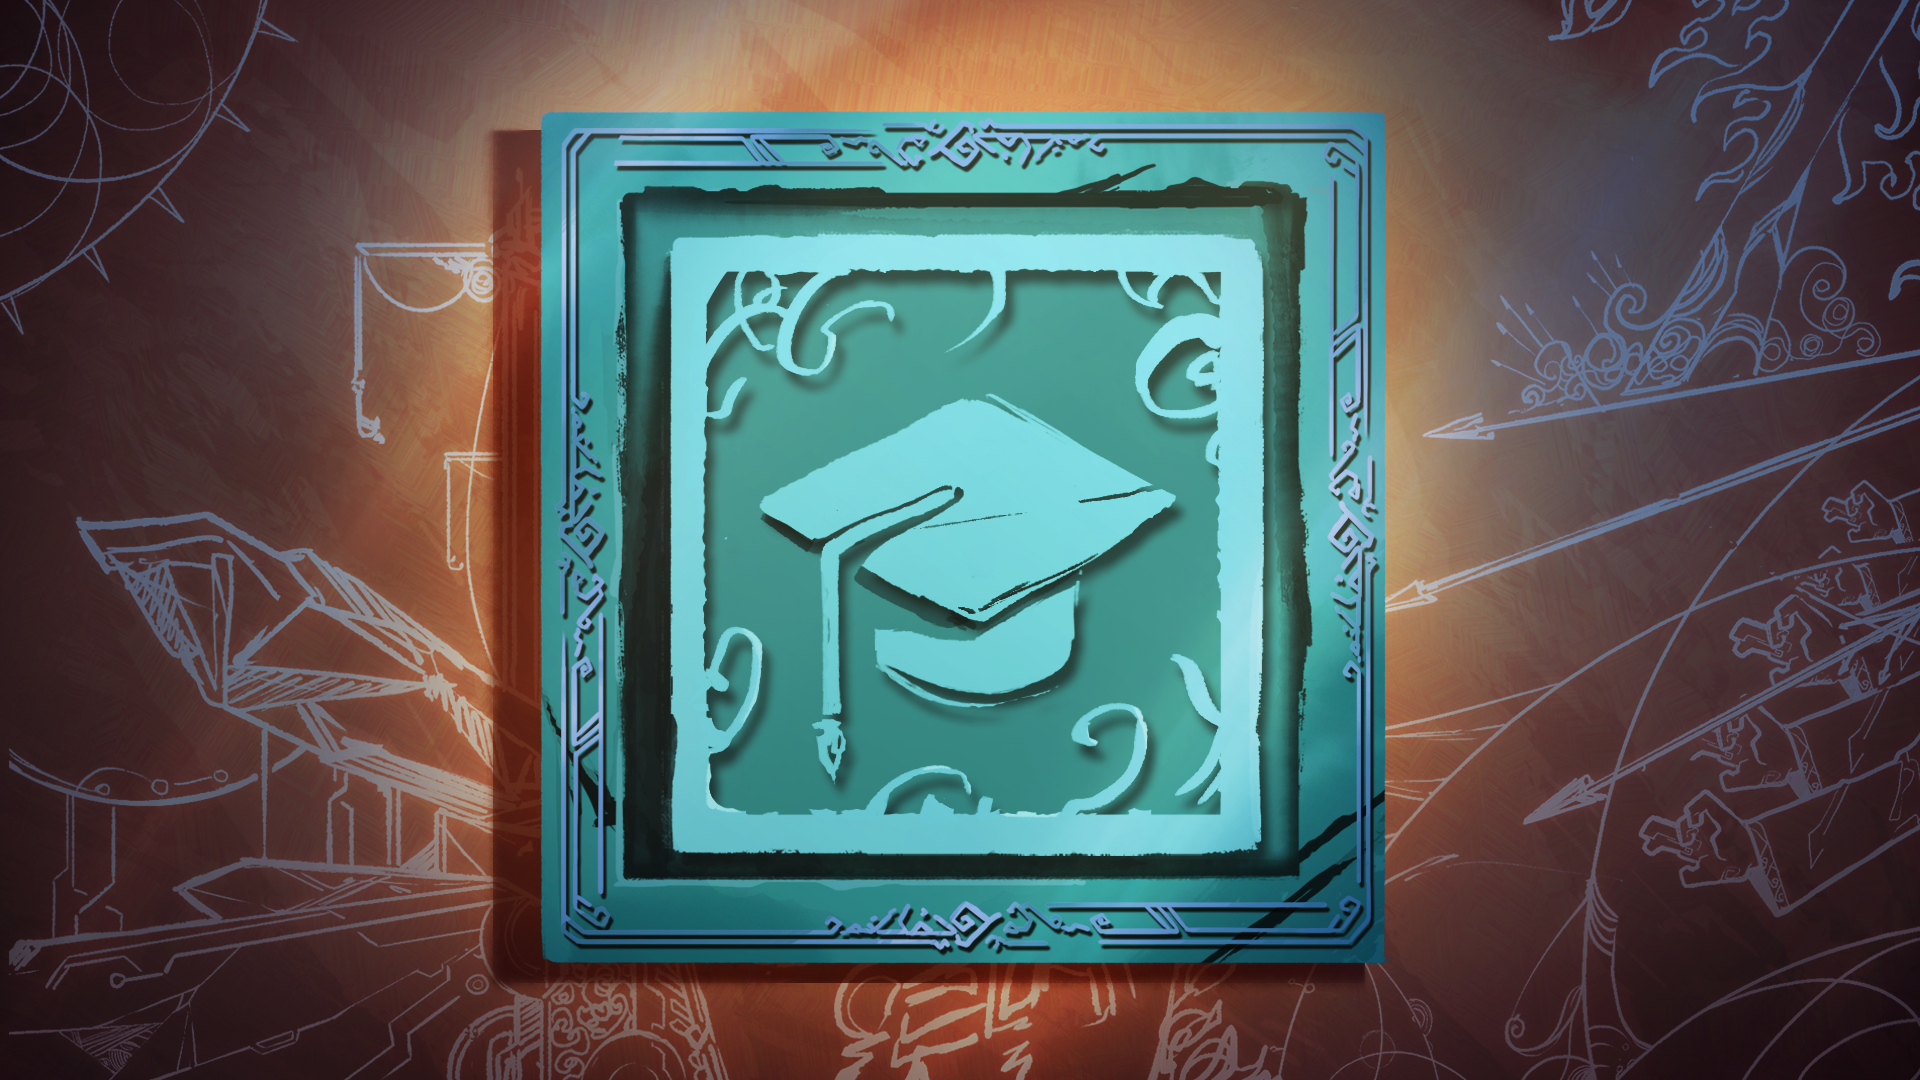 Icon for The Dice Student...